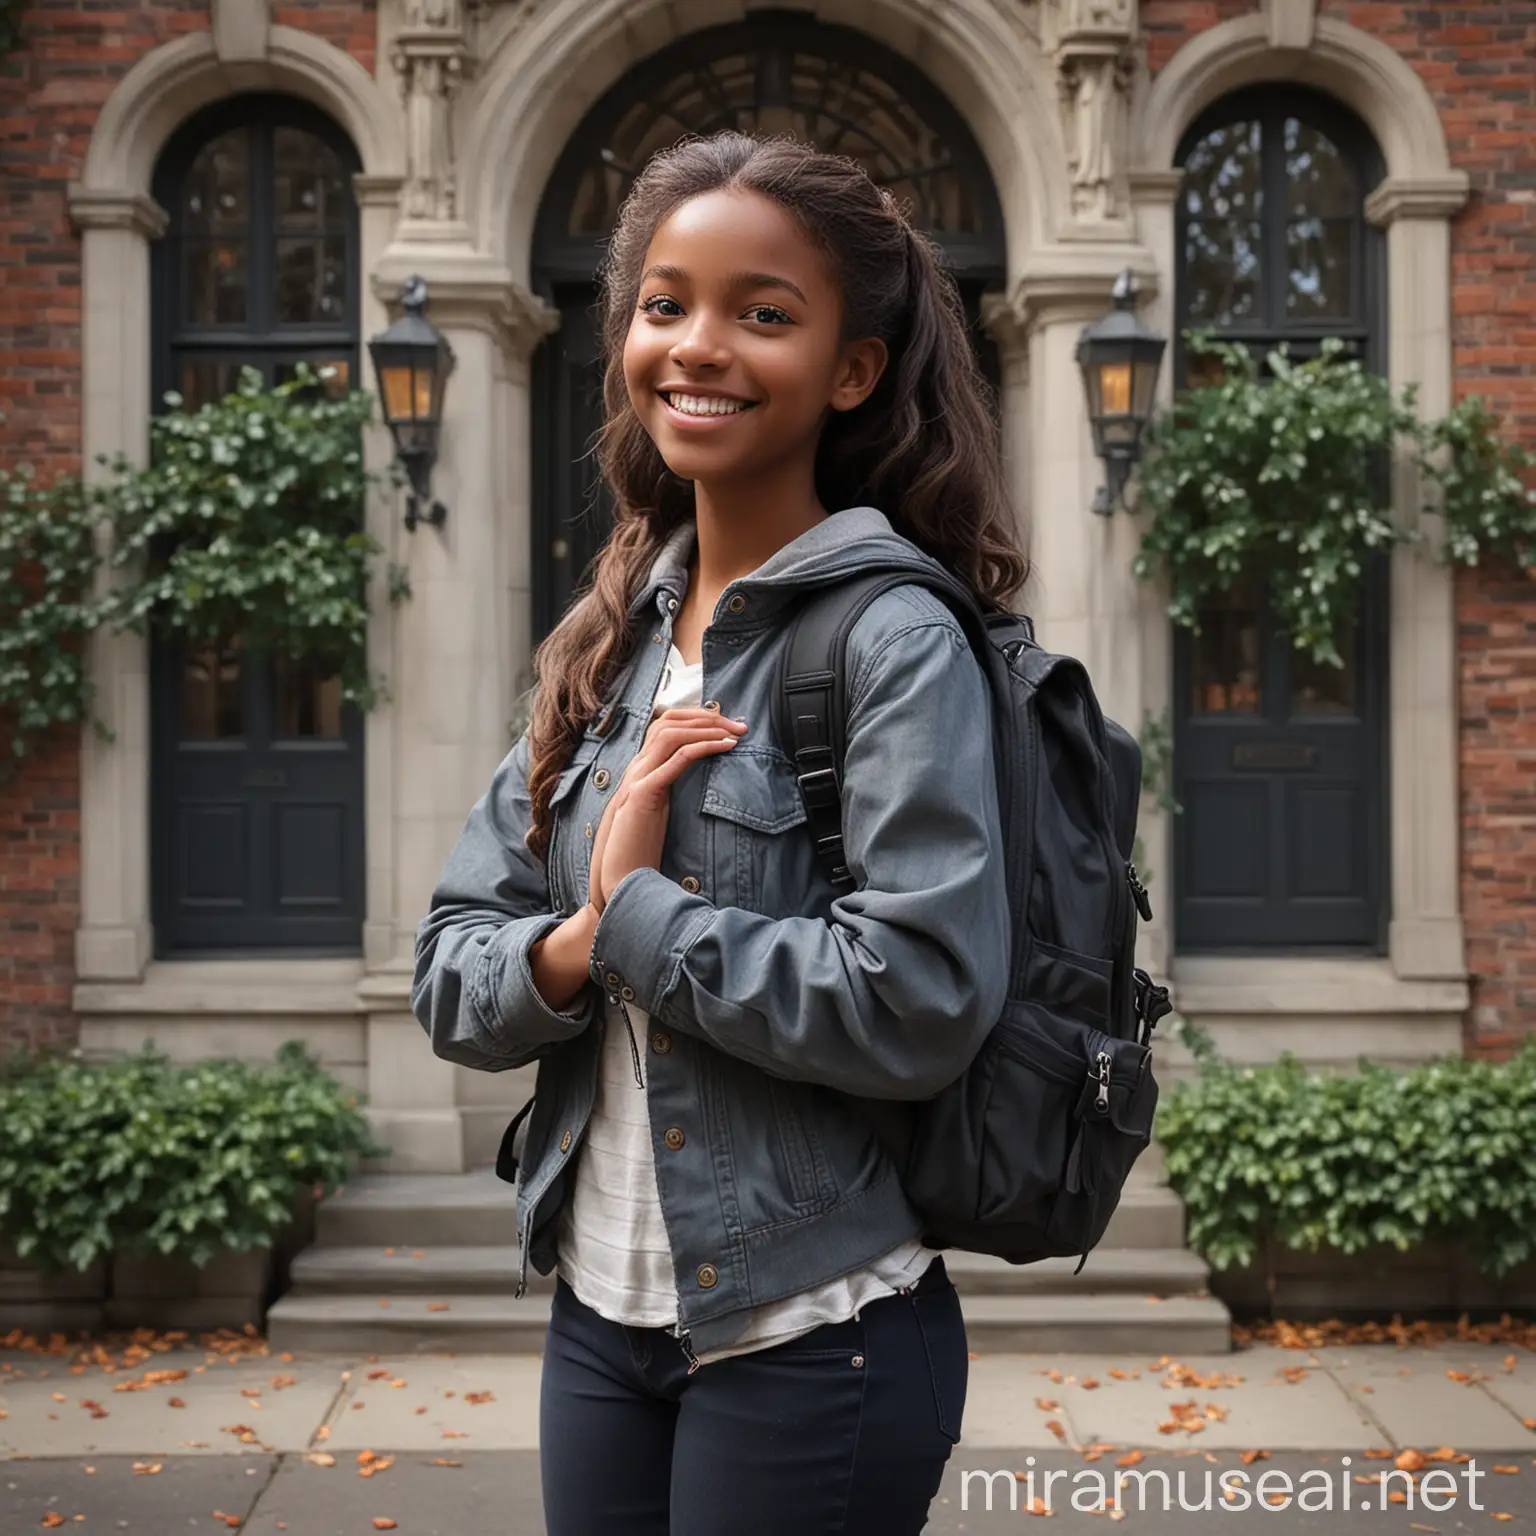 Confident DarkSkinned Woman with Backpack at Ivy League Building